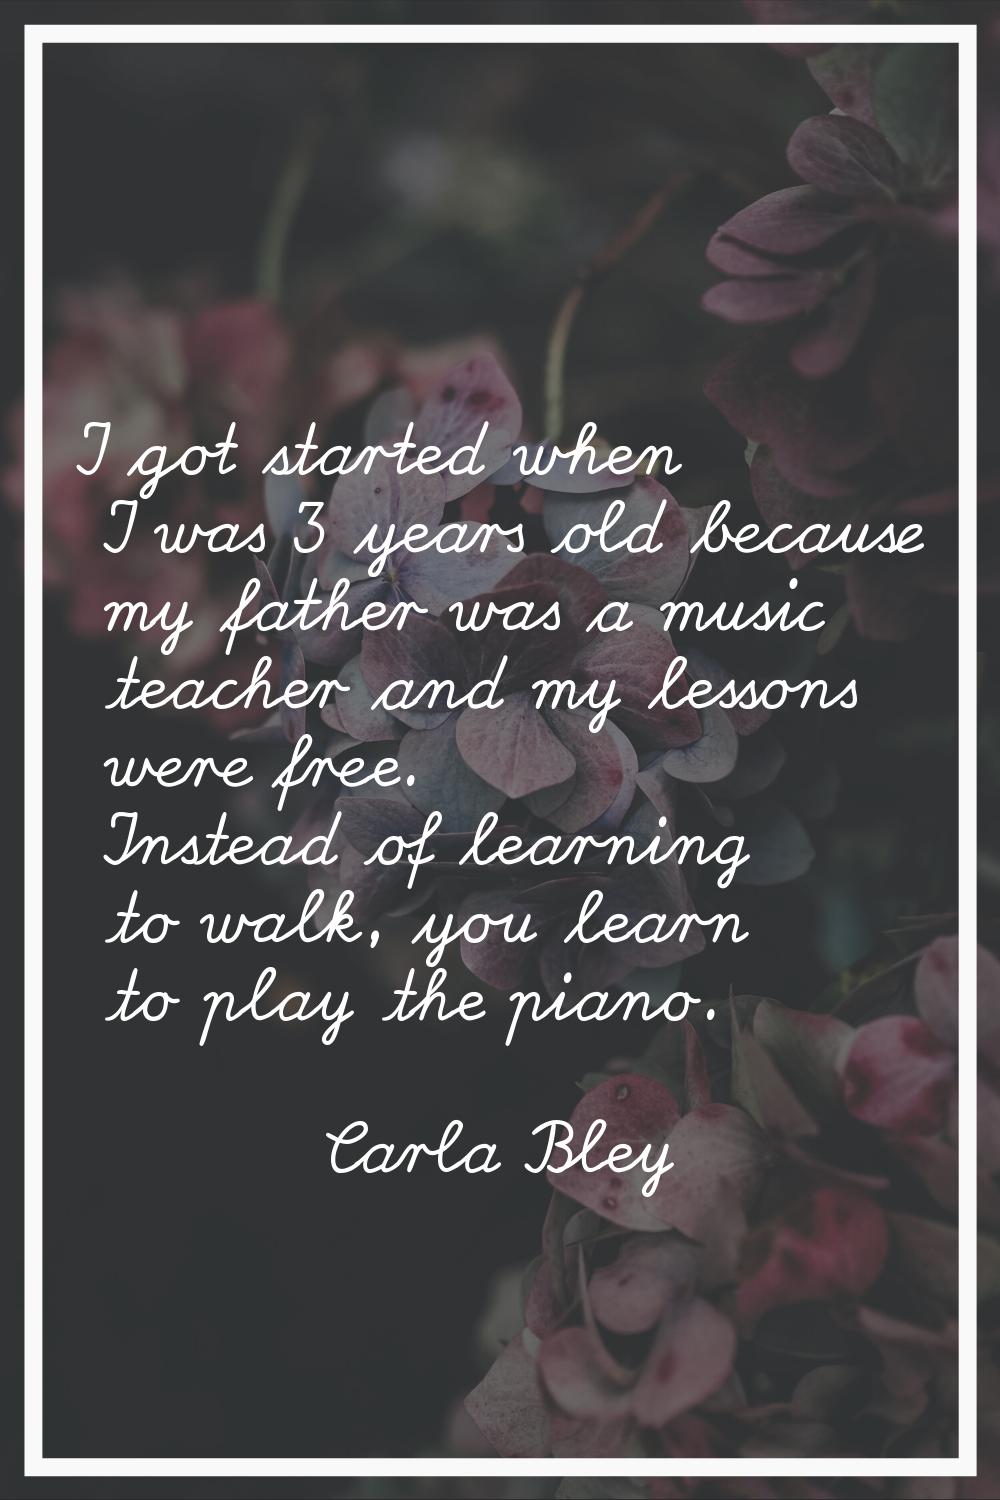 I got started when I was 3 years old because my father was a music teacher and my lessons were free